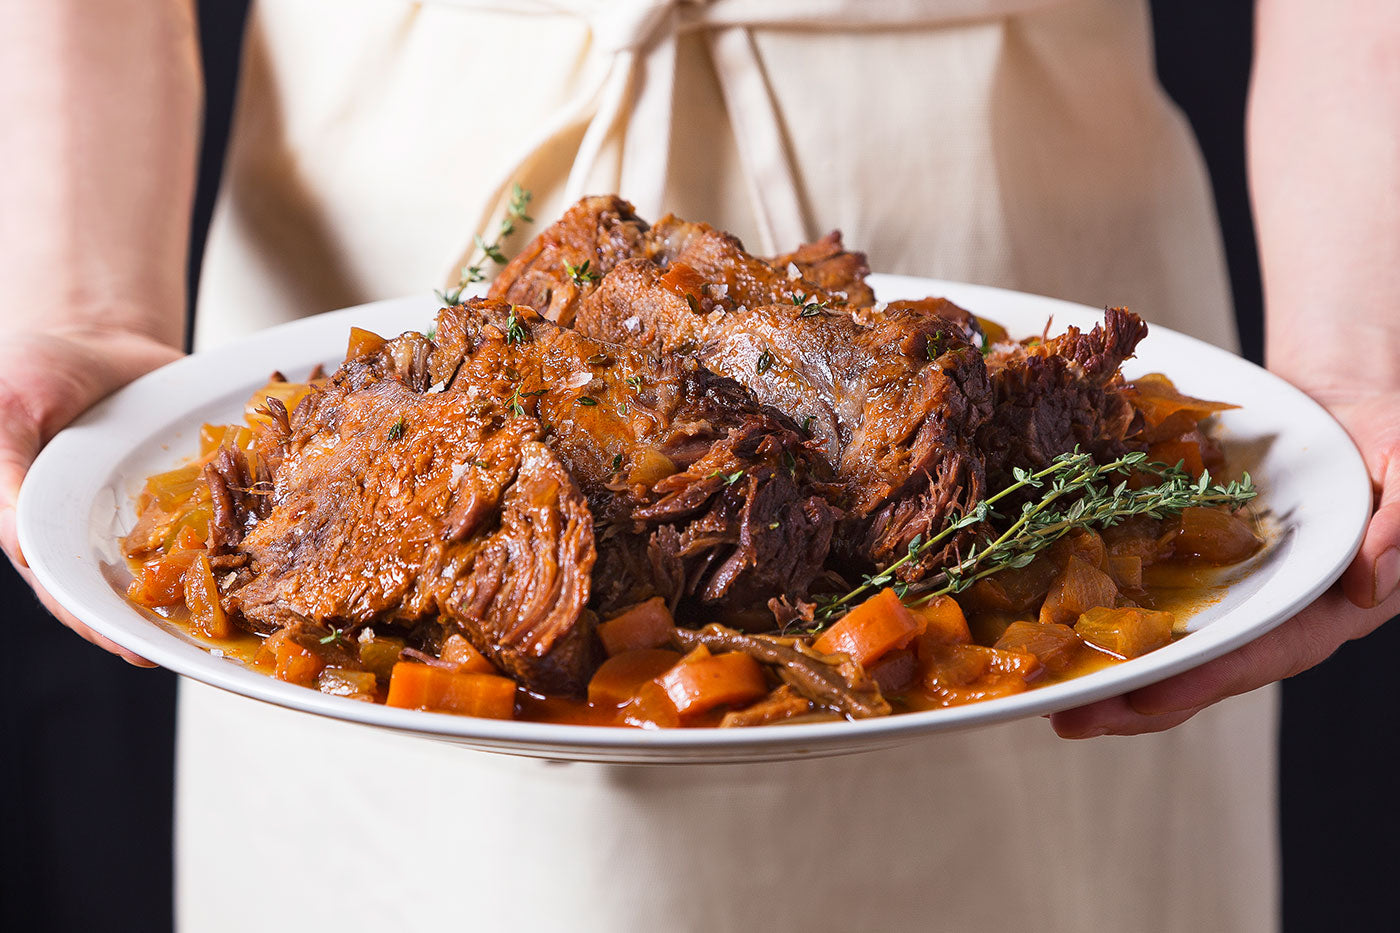 Instant Pot Roast - Cook a 4-pound roast in an hour